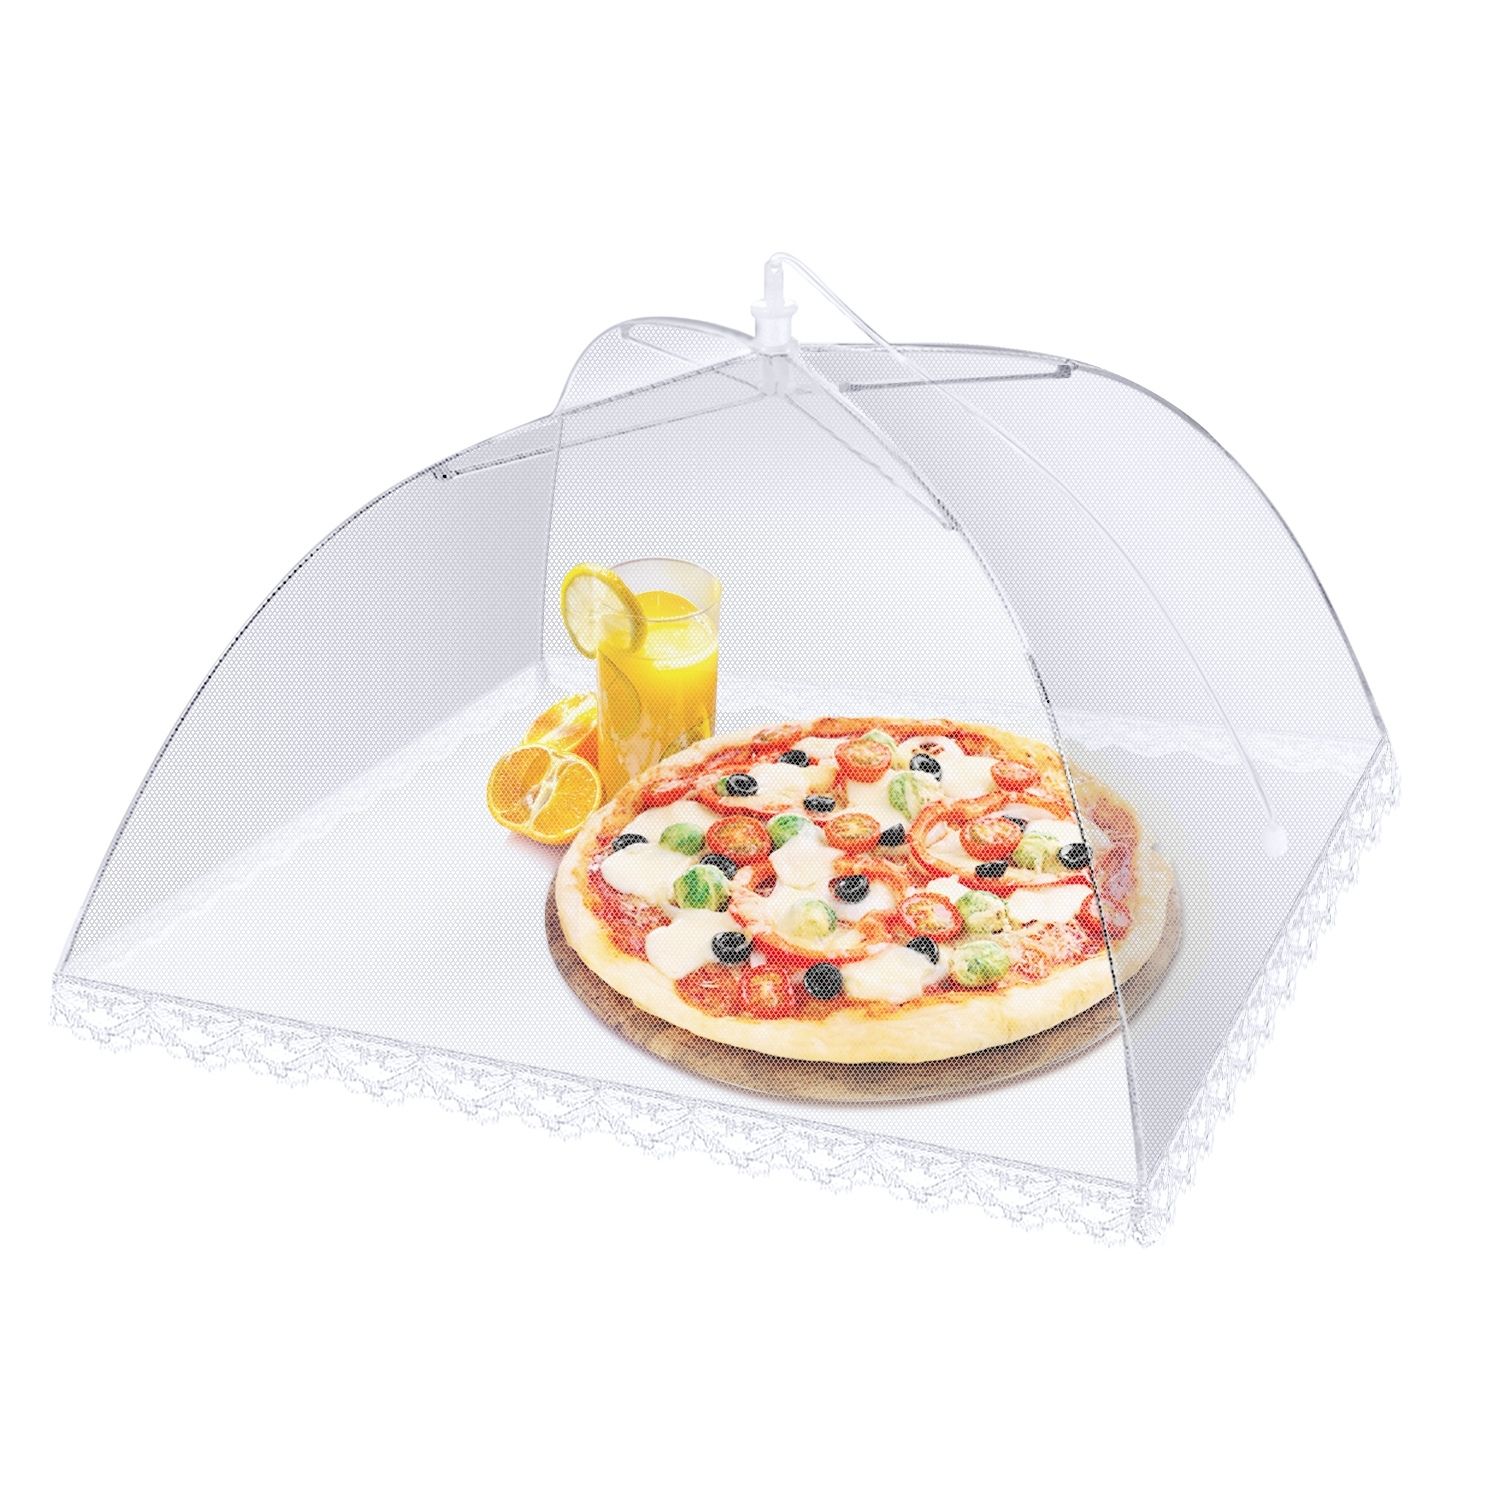 CE Compass Food Cover Tent - Pop Up Mesh Screen Net Umbrella Covers Keep Out Flies, Bugs, Mosquitos, Wasps Pefect for Outdoor Picnic